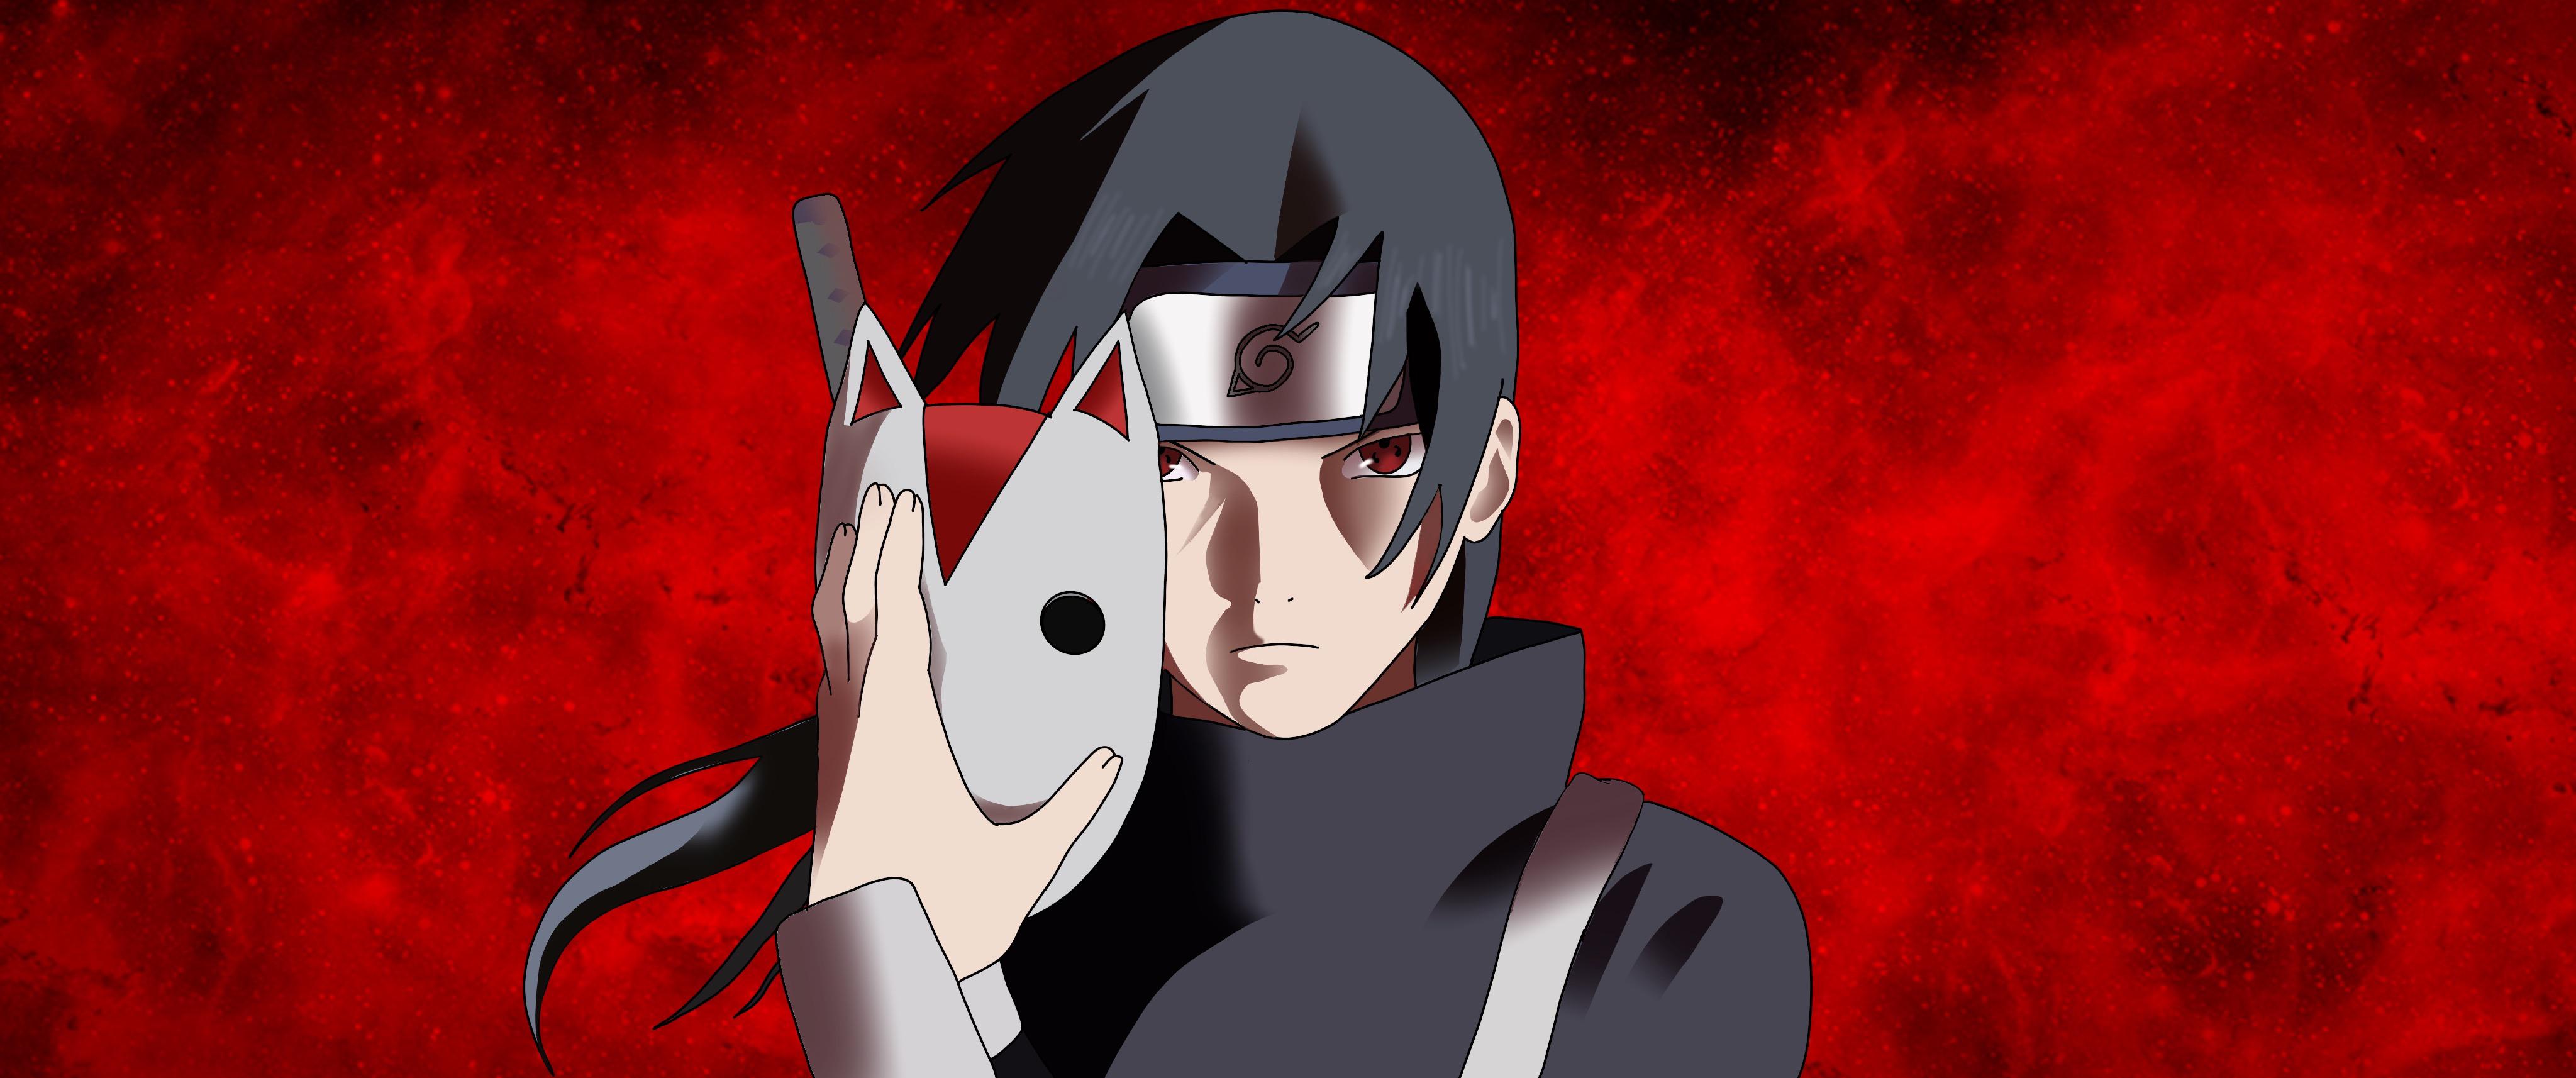 Itachi banner (artwork by me)